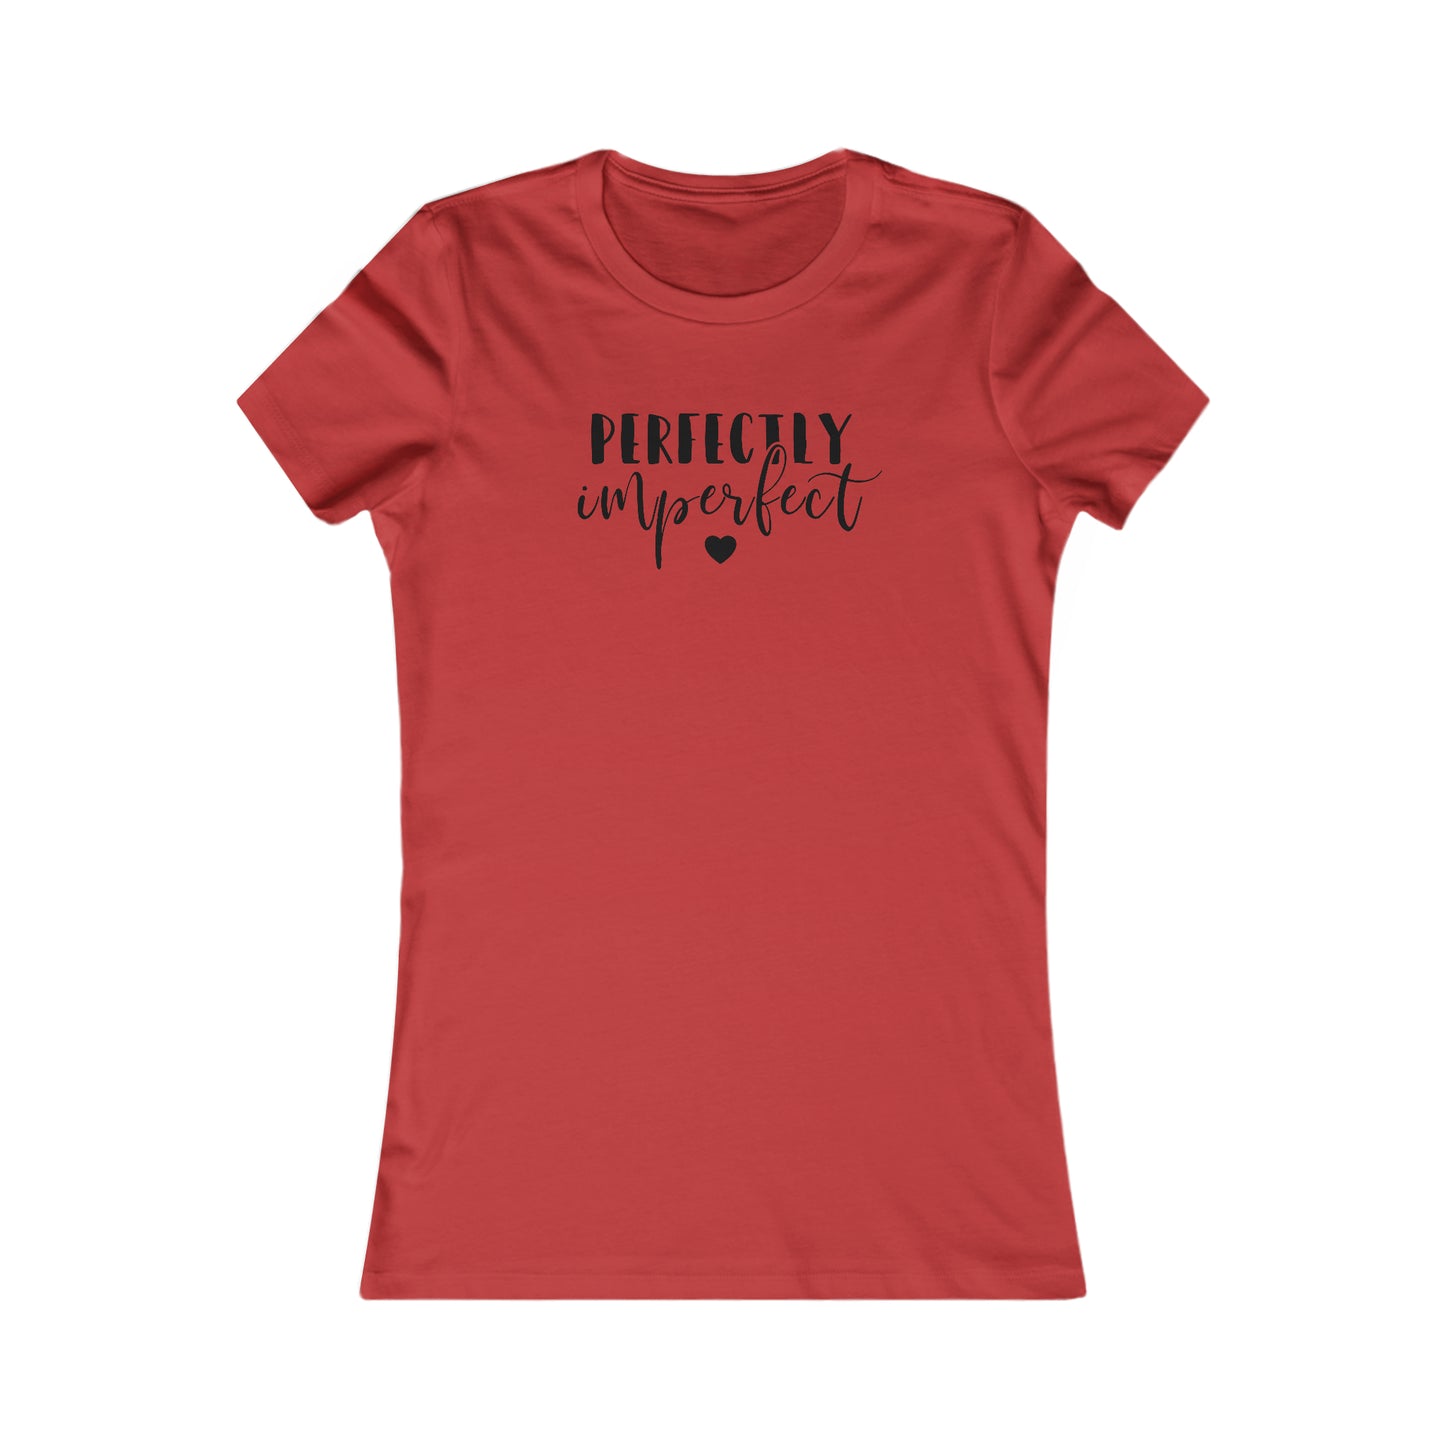 Perfectly Imperfect - Women's Favorite Tee